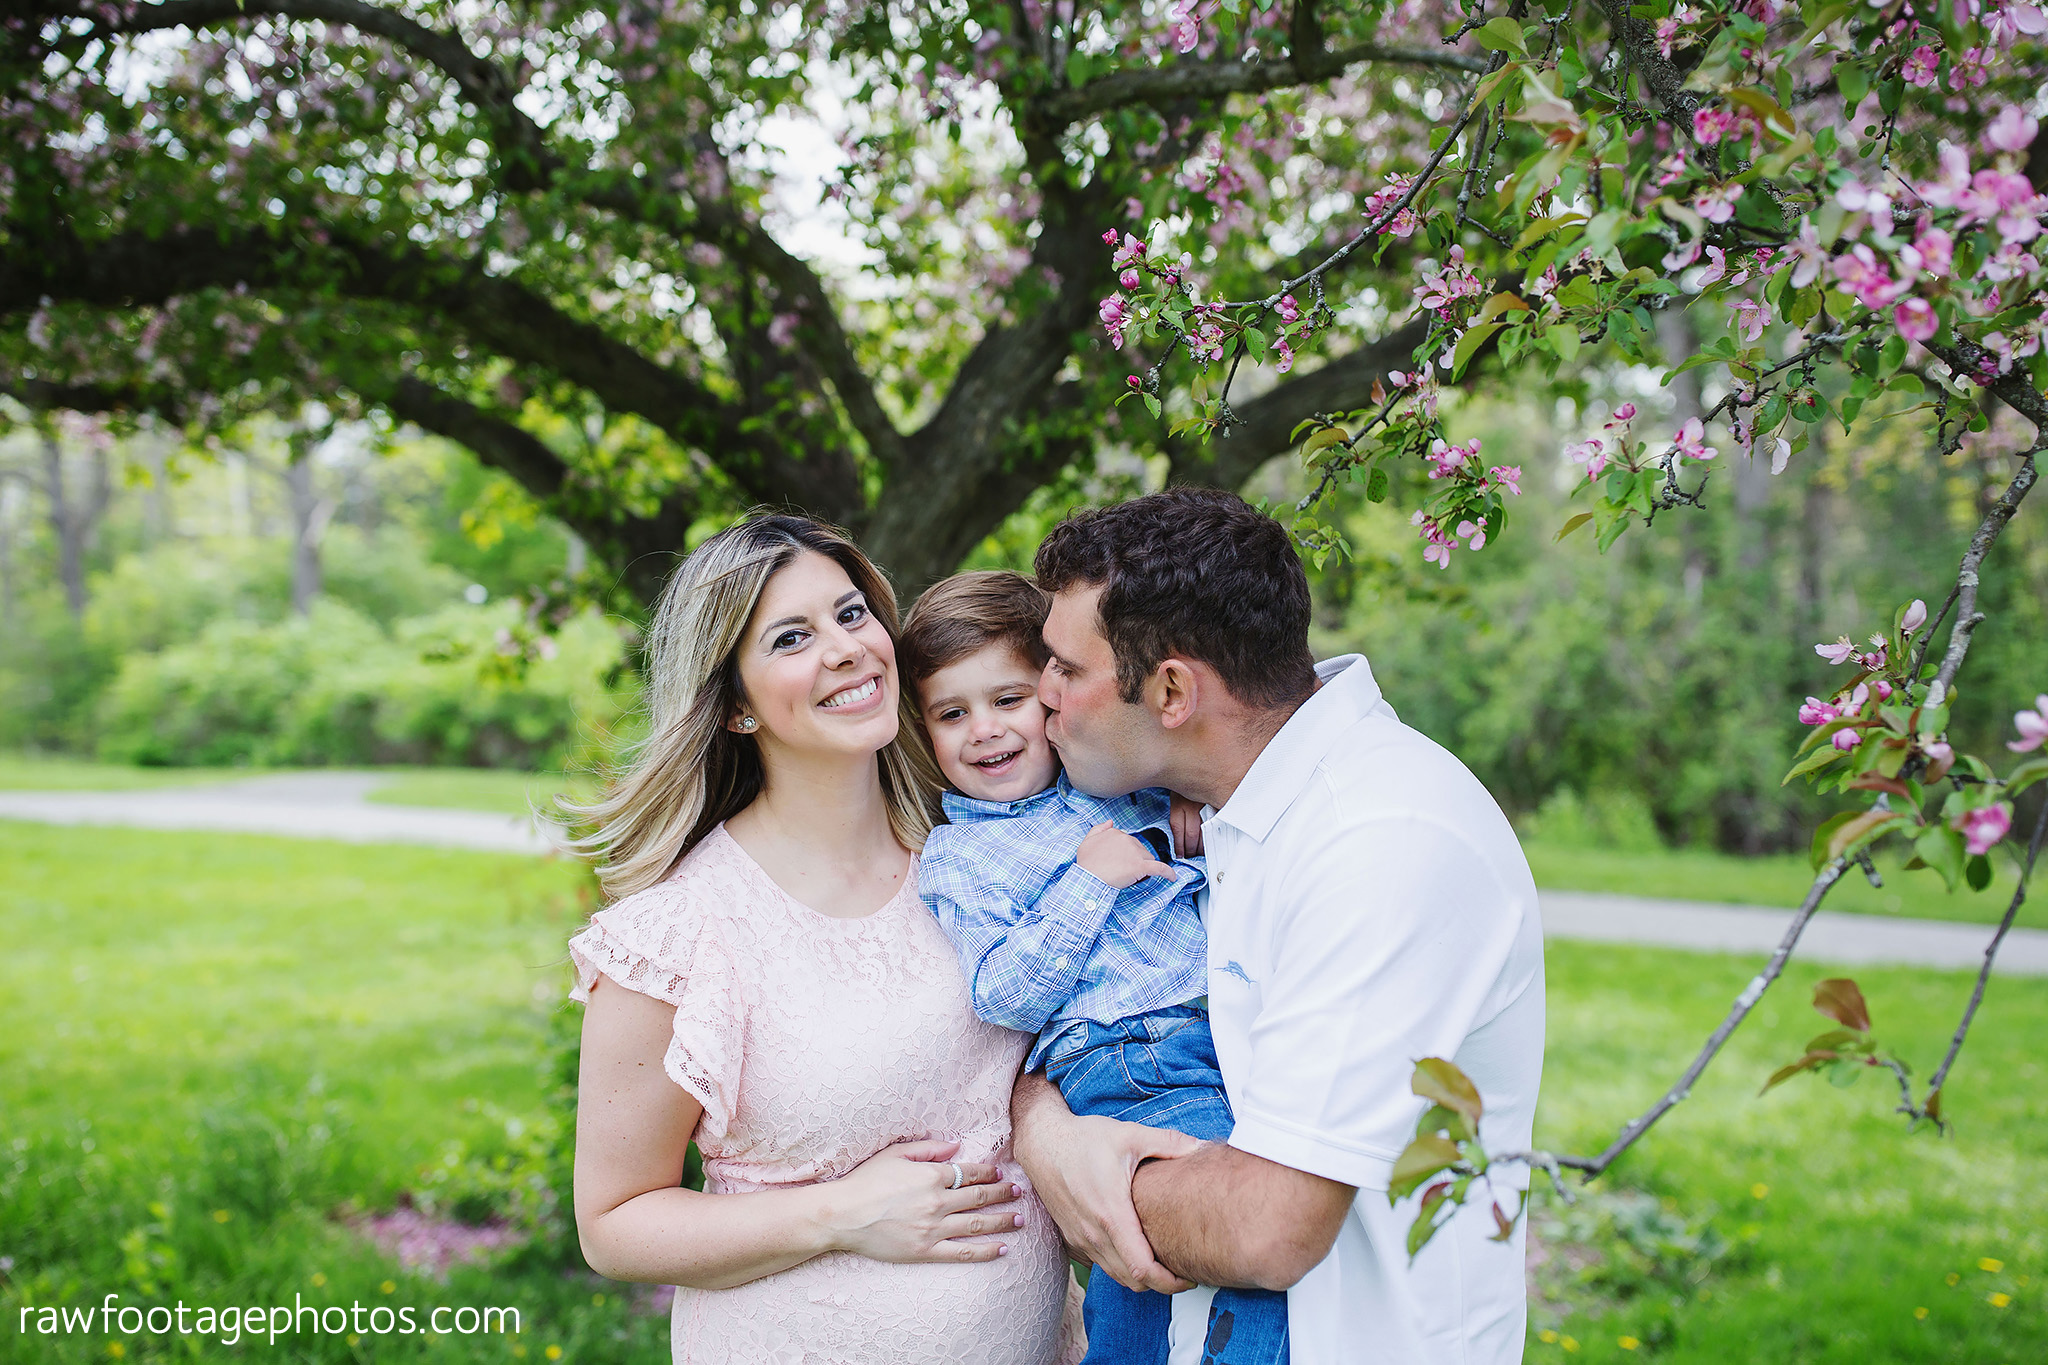 london_ontario_family_photography-lifestyle_photography-maternity_photos-raw_footage_photography-best_of_2018095.jpg